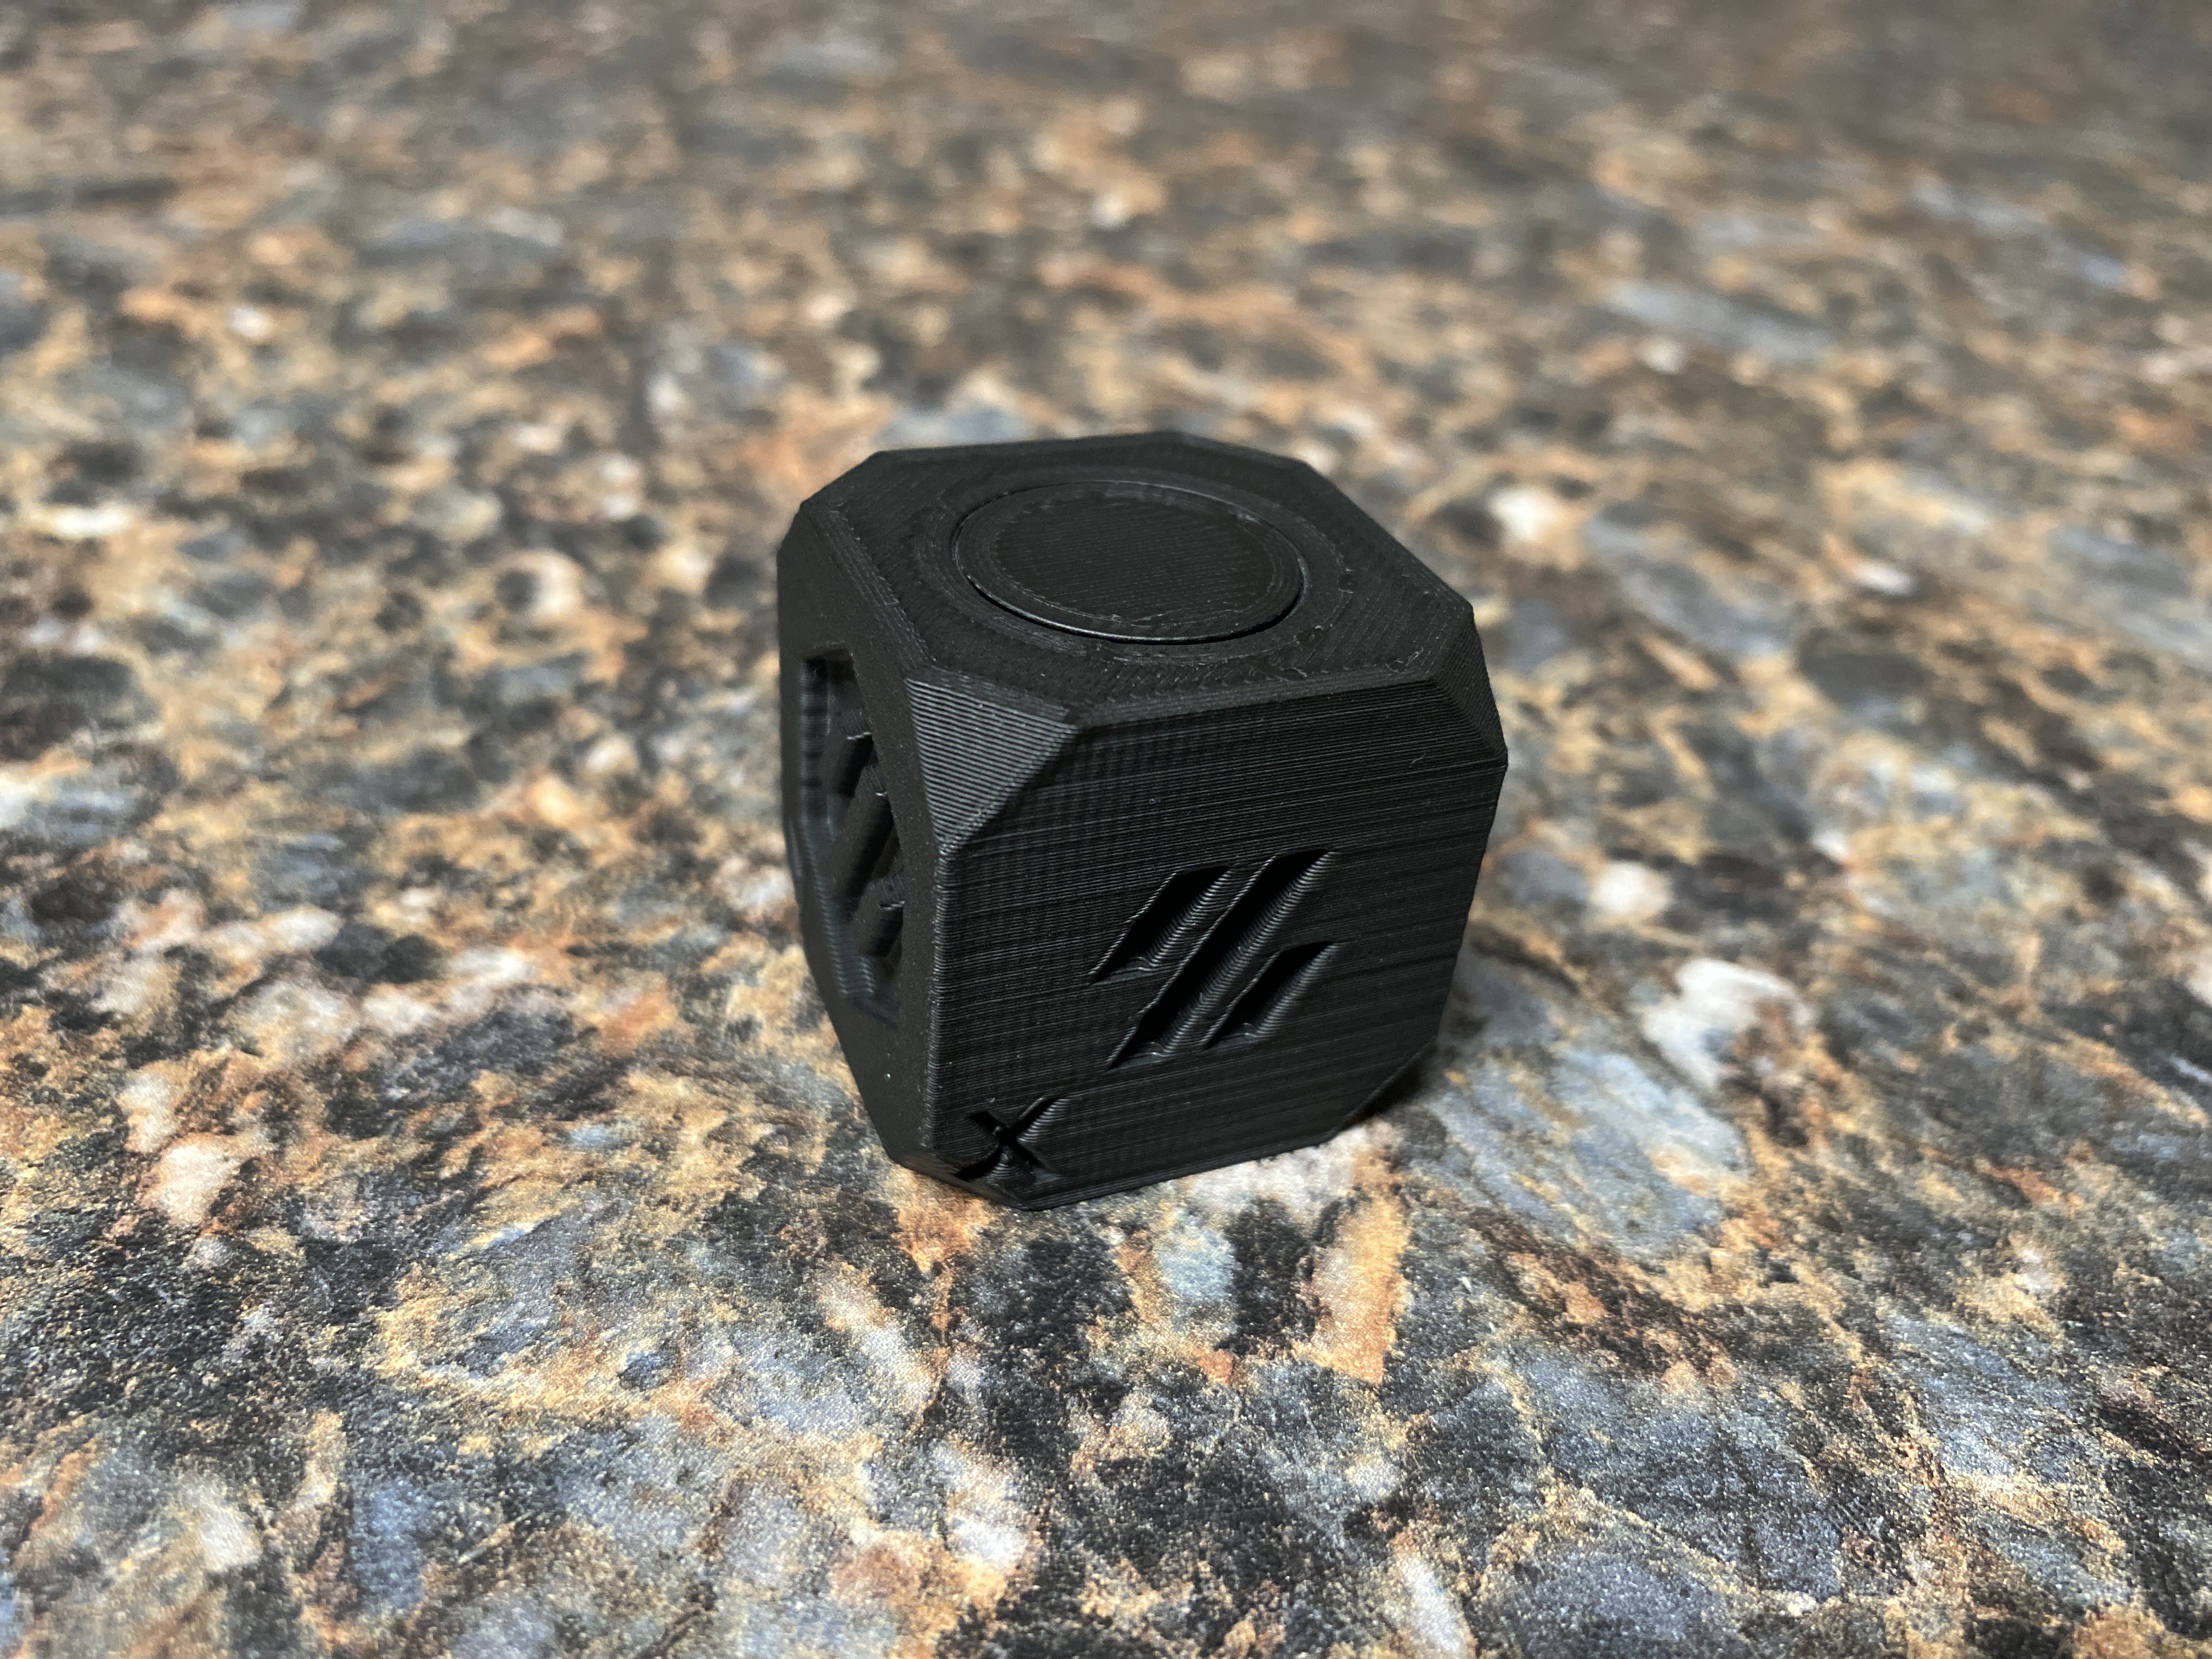 Voron Design Cube V7 (with a spin… literally)